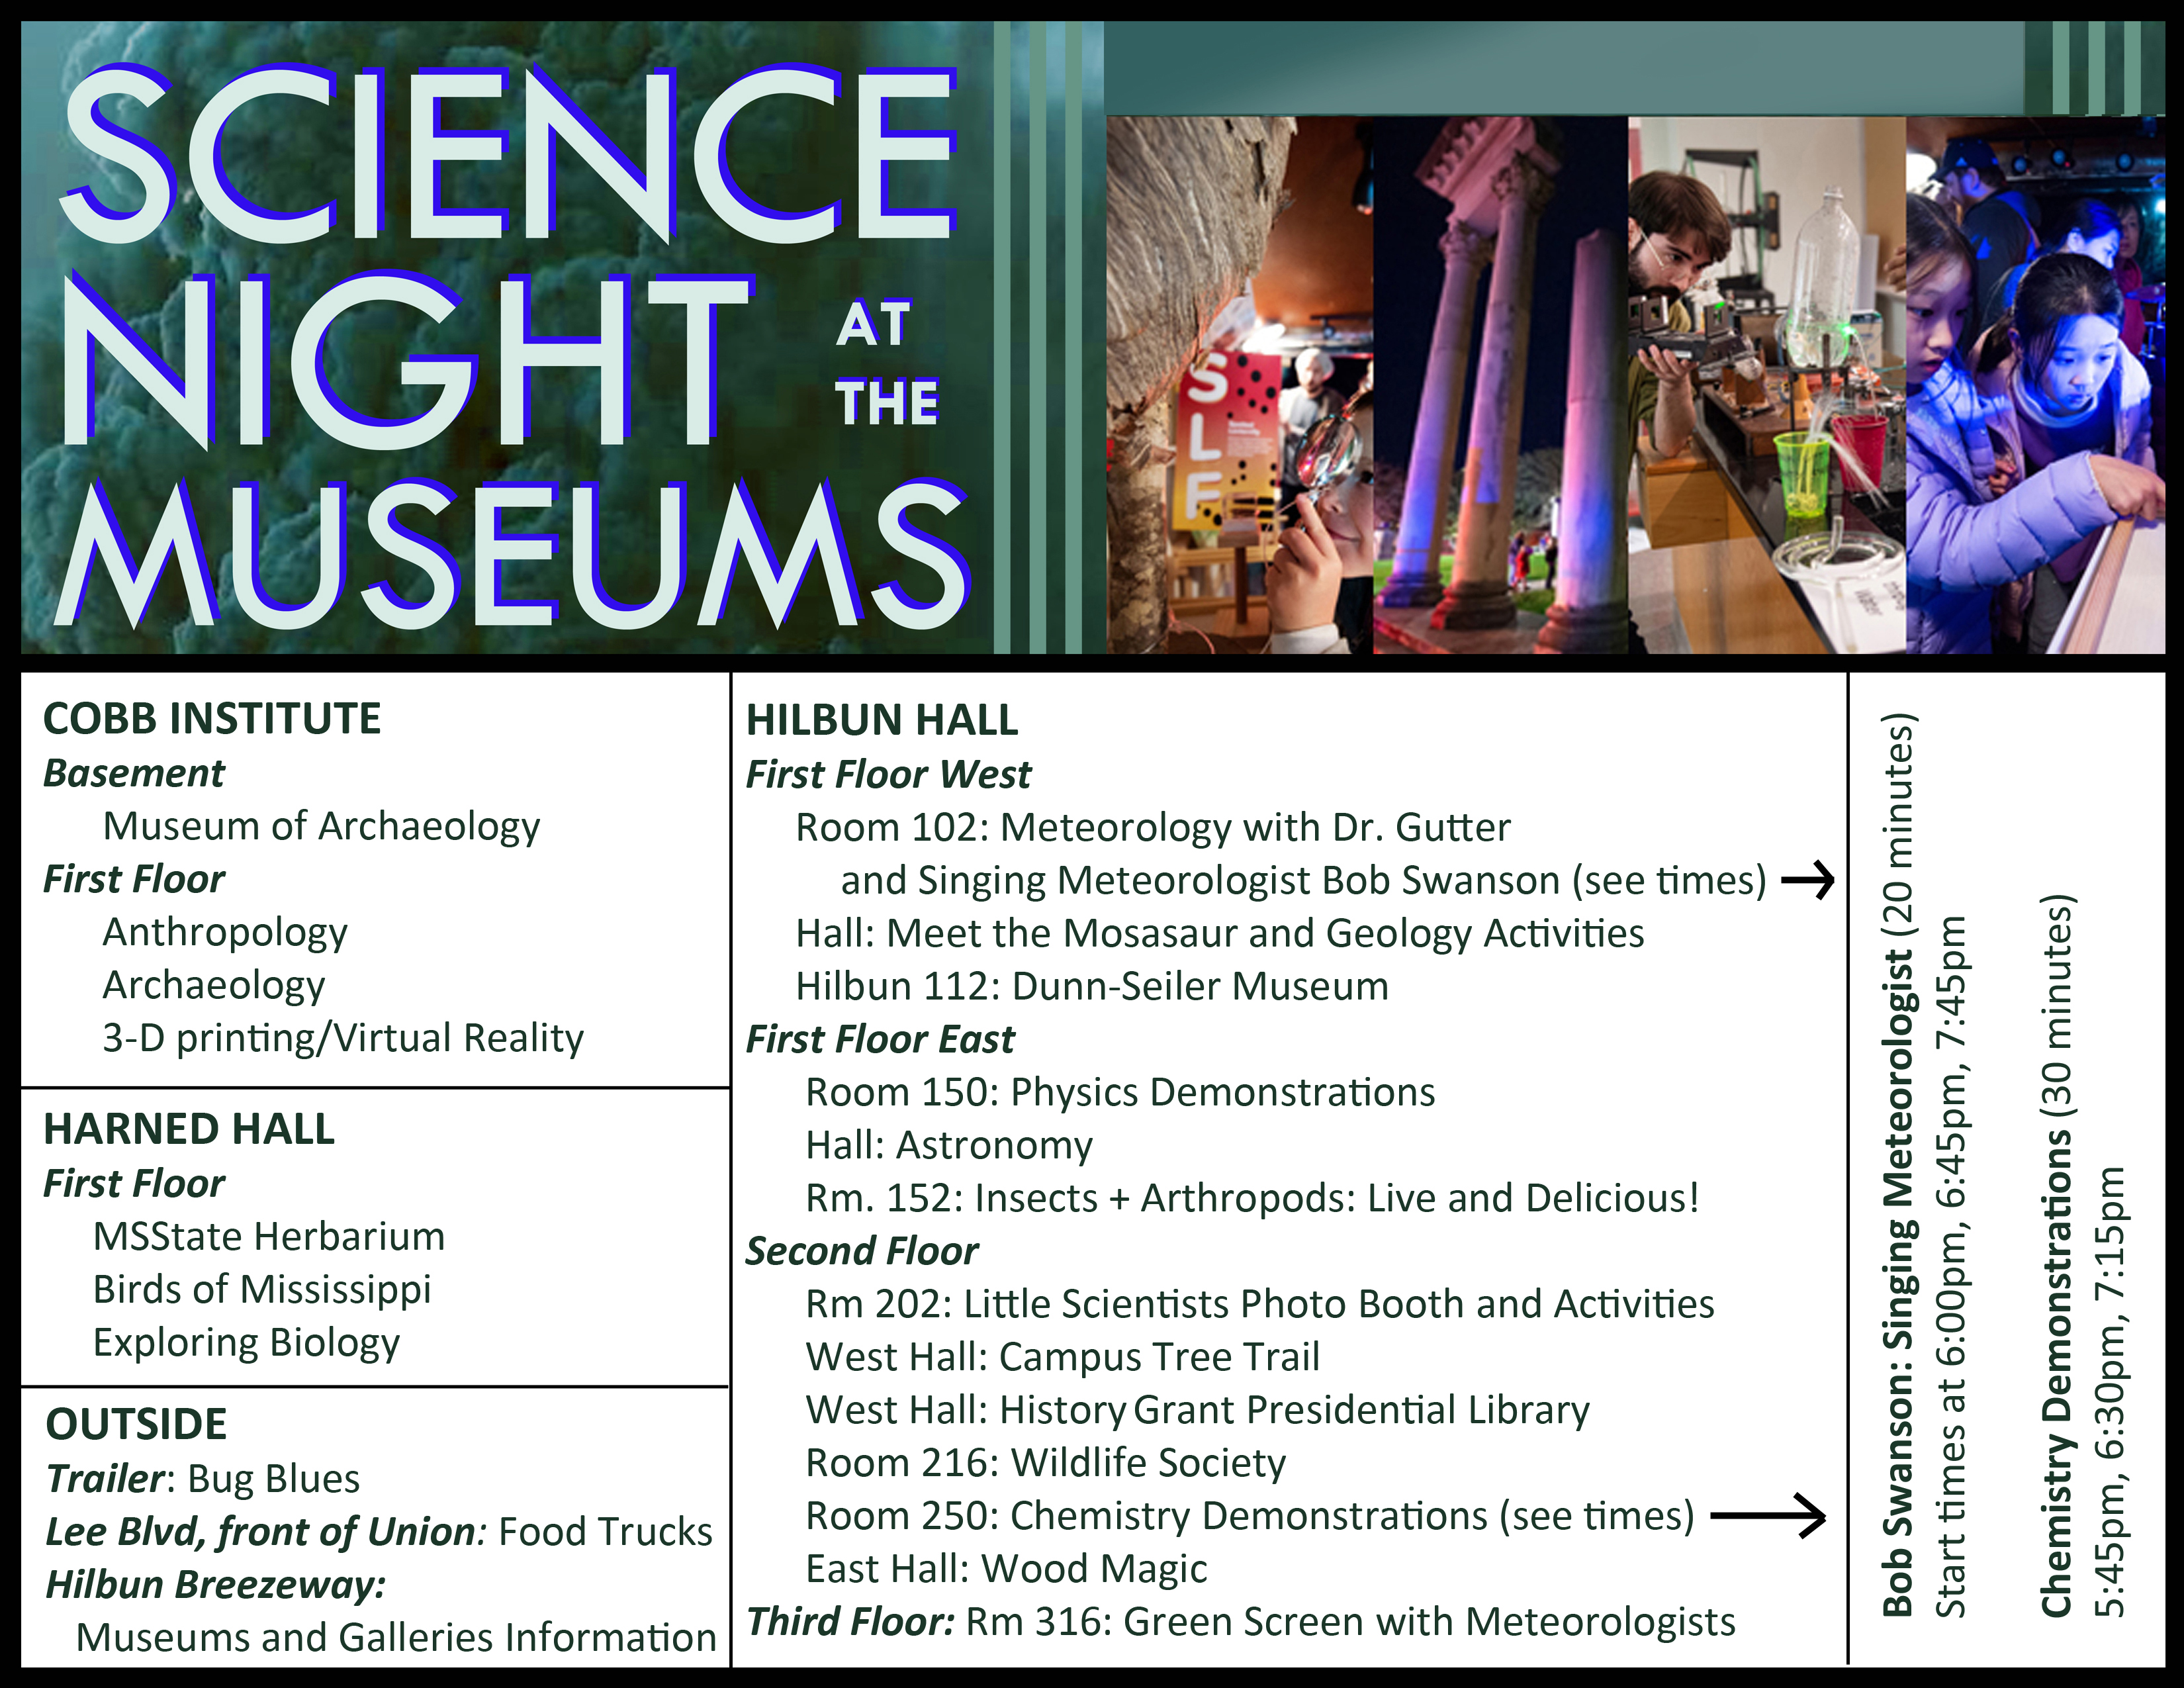 Science Night at the Museums flyer. 